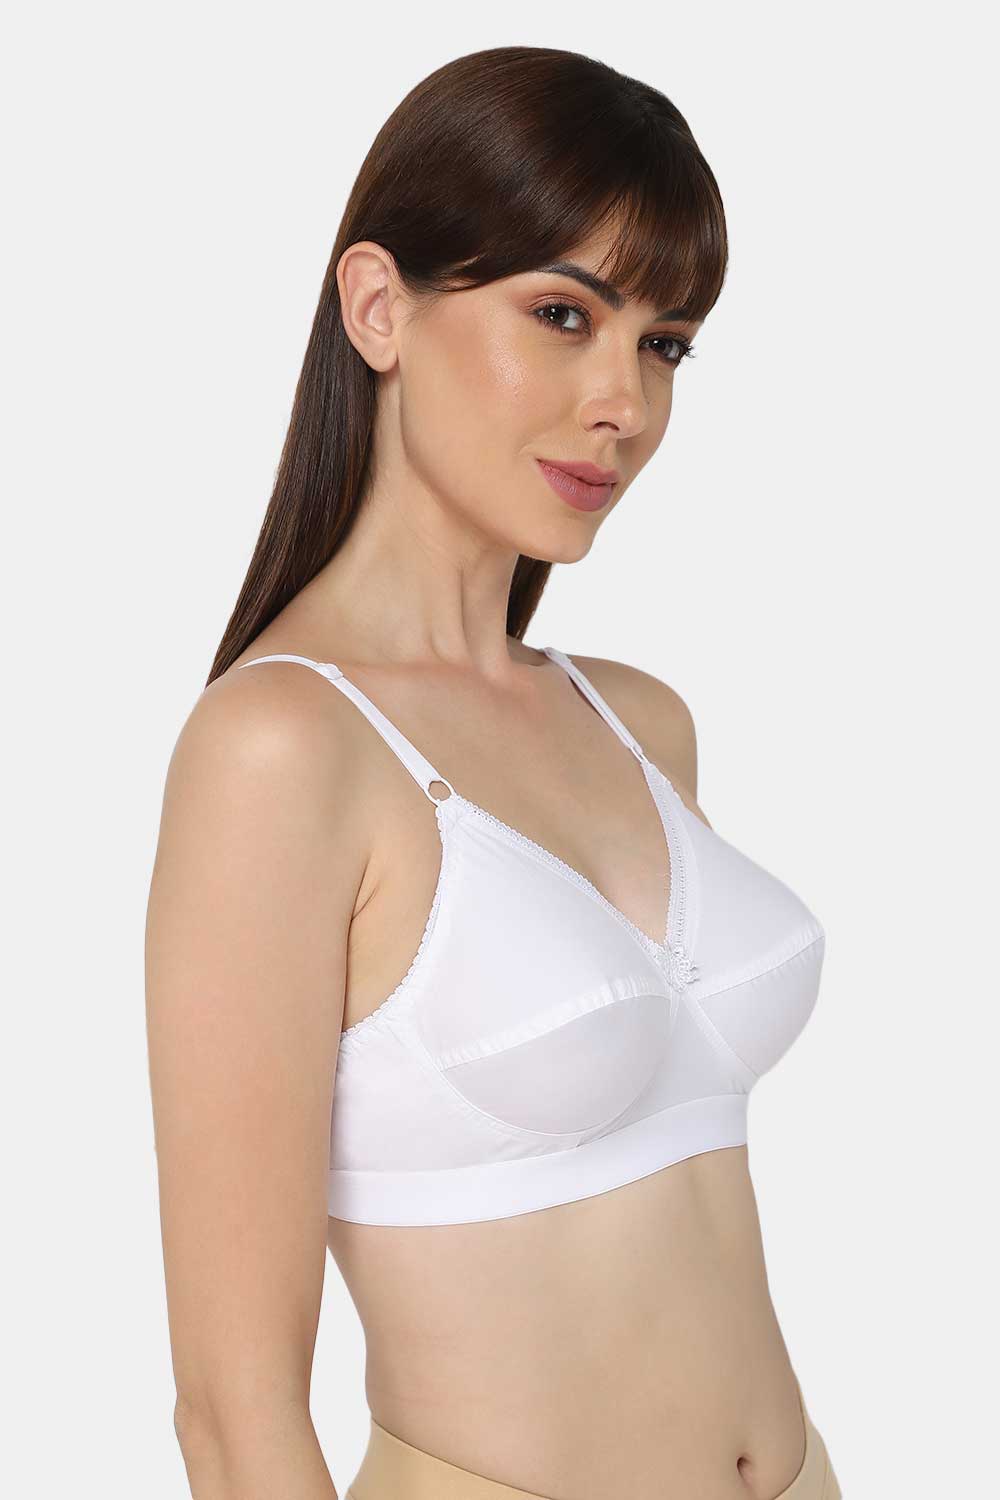 YOUNG UNDERWEAR, Women's 100% Cotton Bra, Ultimate Comfort,  Breathability, and Support